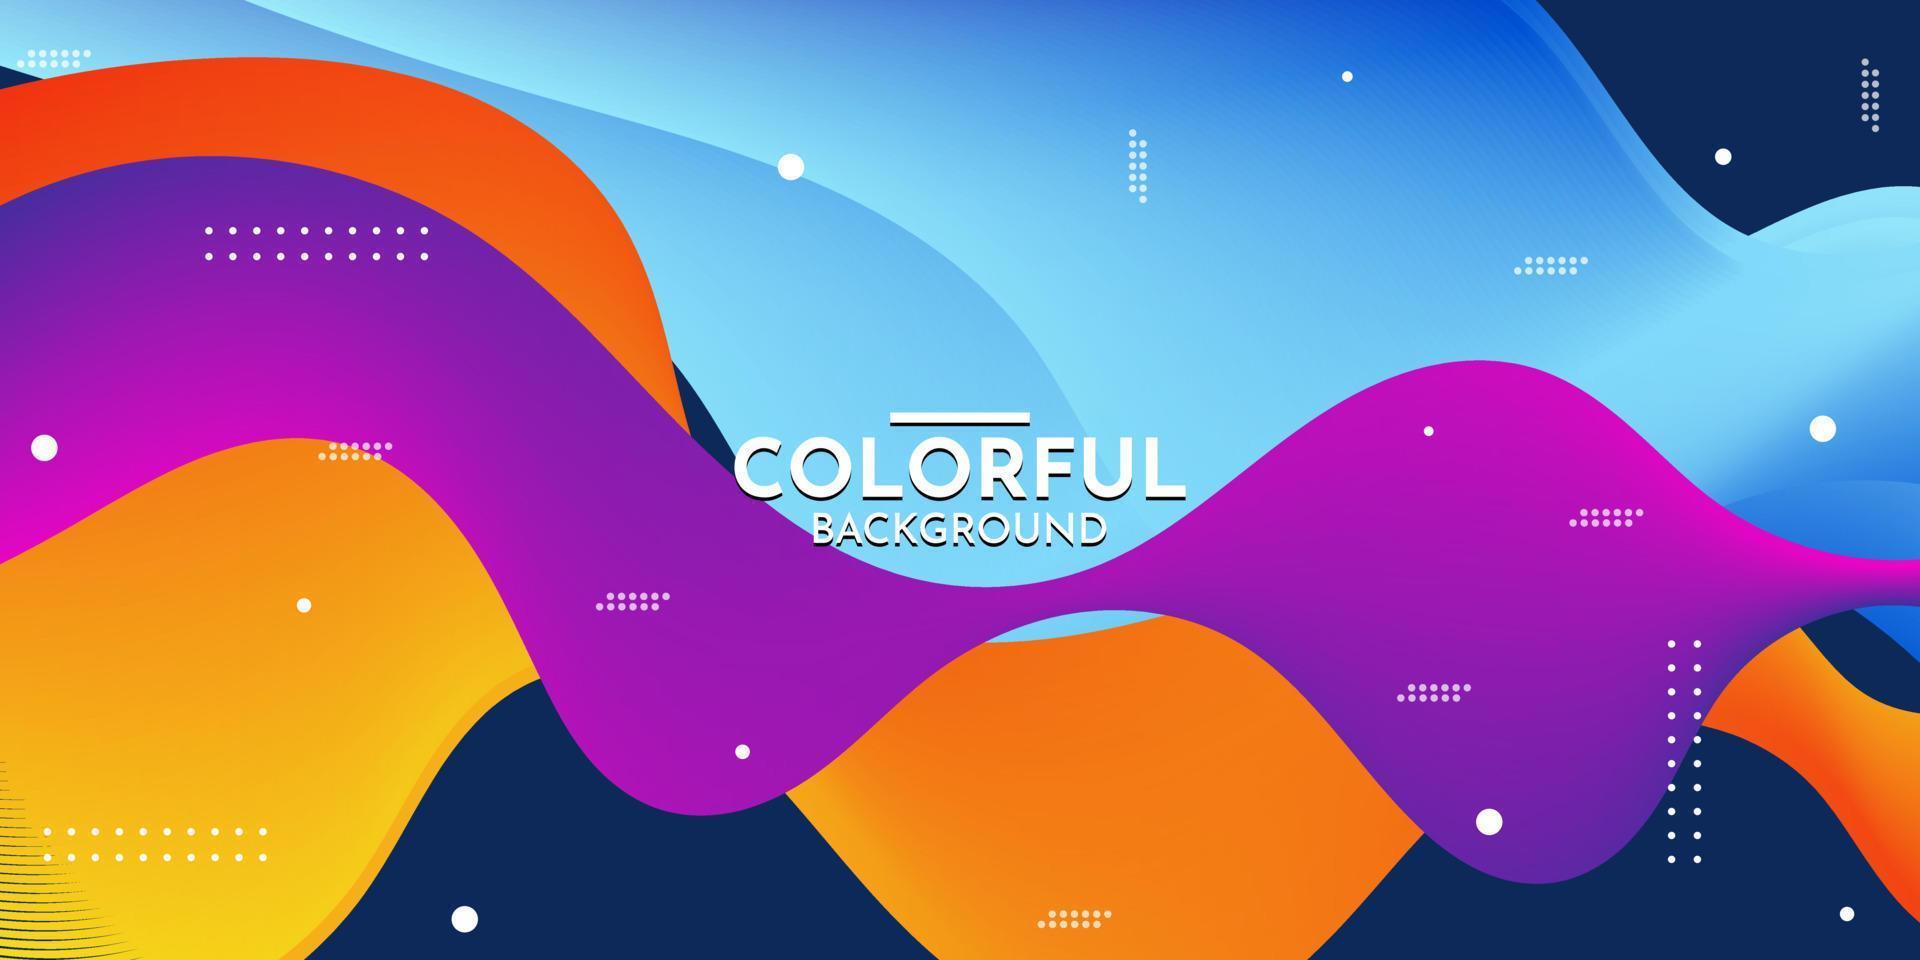 Abstract colorful shapes background design vector